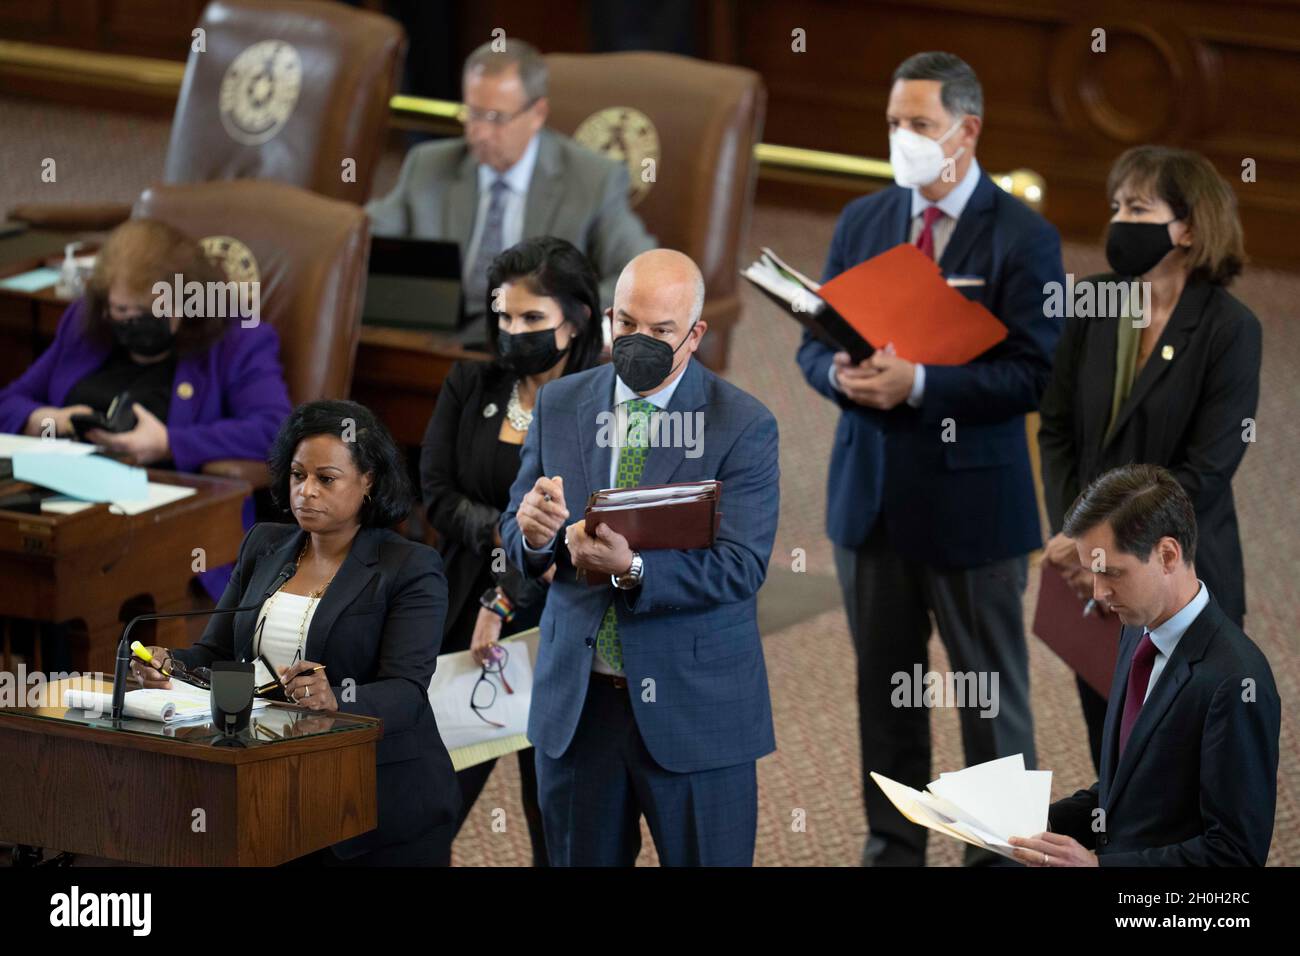 Austin Texas USA, October 12, 2021: State Rep. NICOLE COLLIER, D-Fort Worth, speaks at the back mic while other representatives wait their turn as the Texas House considers HB1, the redistricting bill, during the third-called 87th Legislature special session. Credit: Bob Daemmrich/Alamy Live News Stock Photo